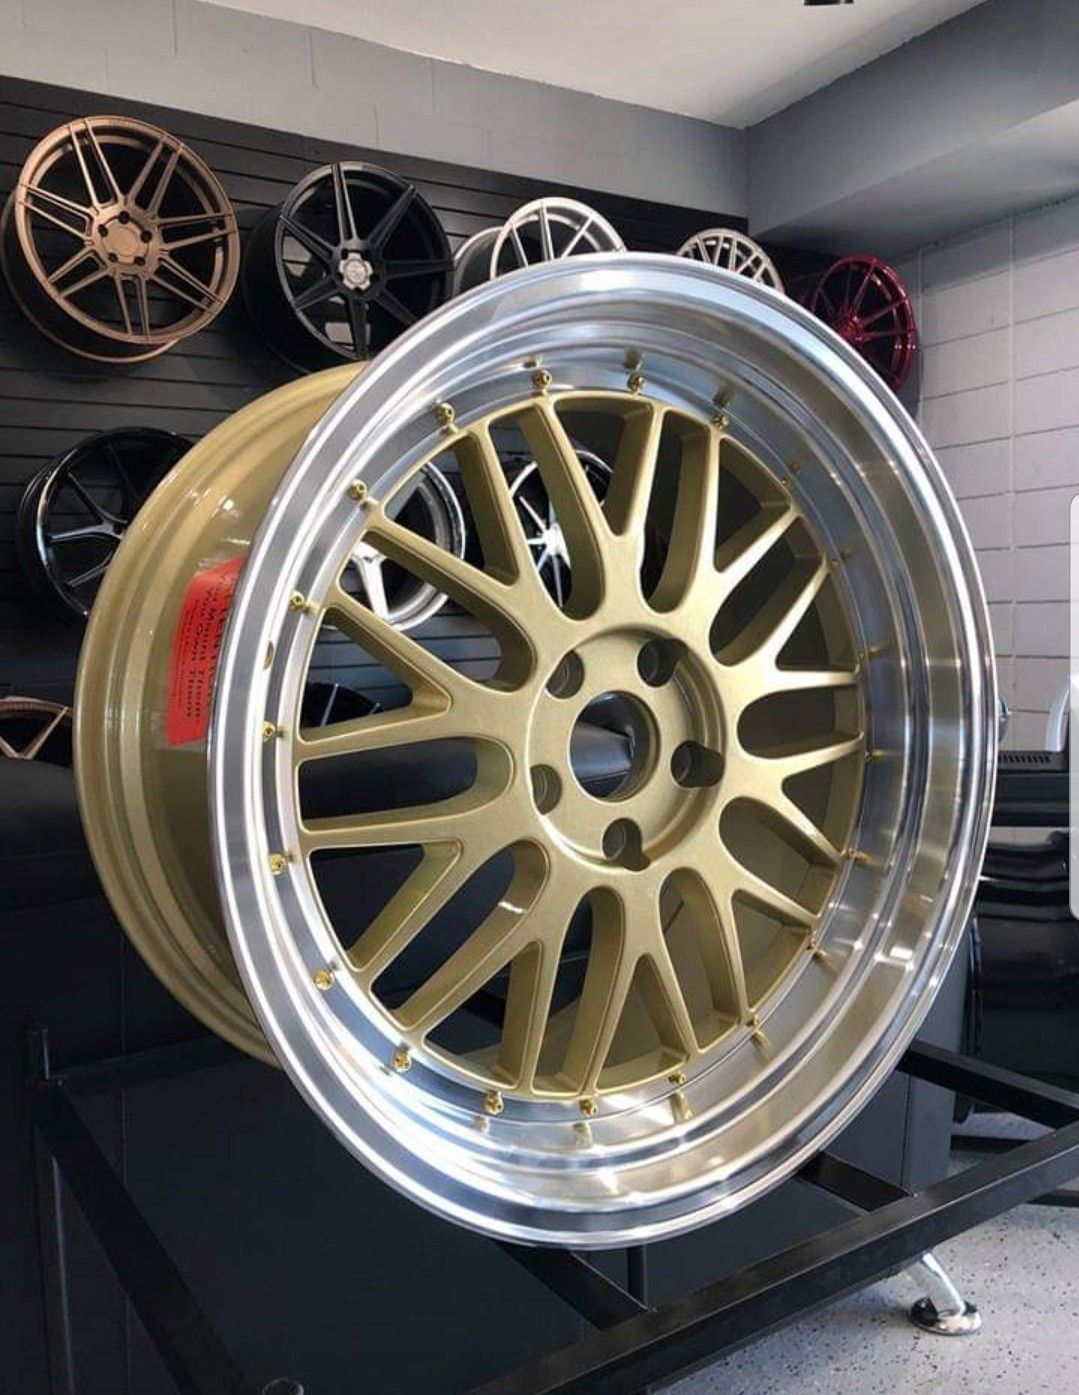 Gold Deep Dish Wheels Brand New in 19" Staggered For G35 G37 350Z 370Z Honda Accord Civic 5x114